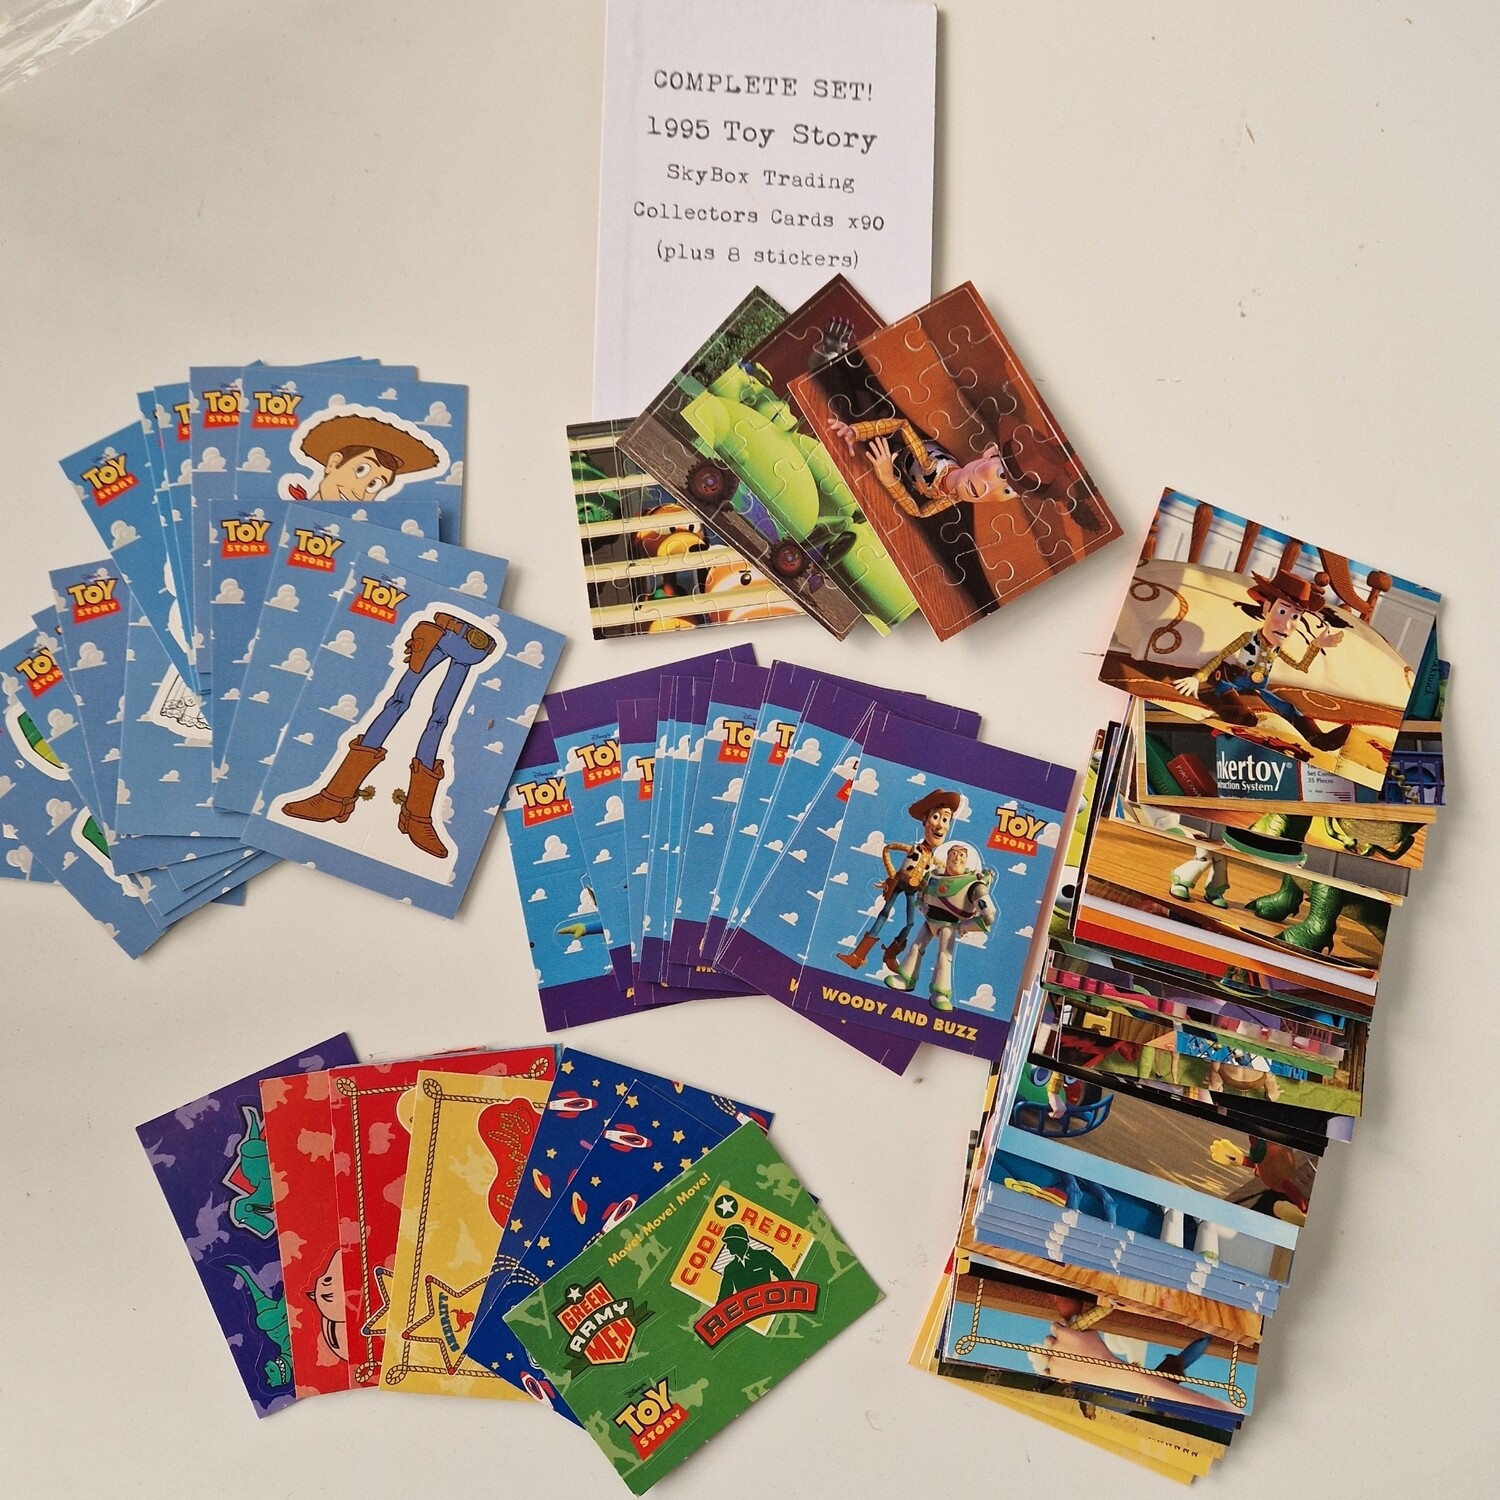 1995 Toy Story SkyBox Trading Cards x 90 (Plus 8 stickers) - READY TO SHIP